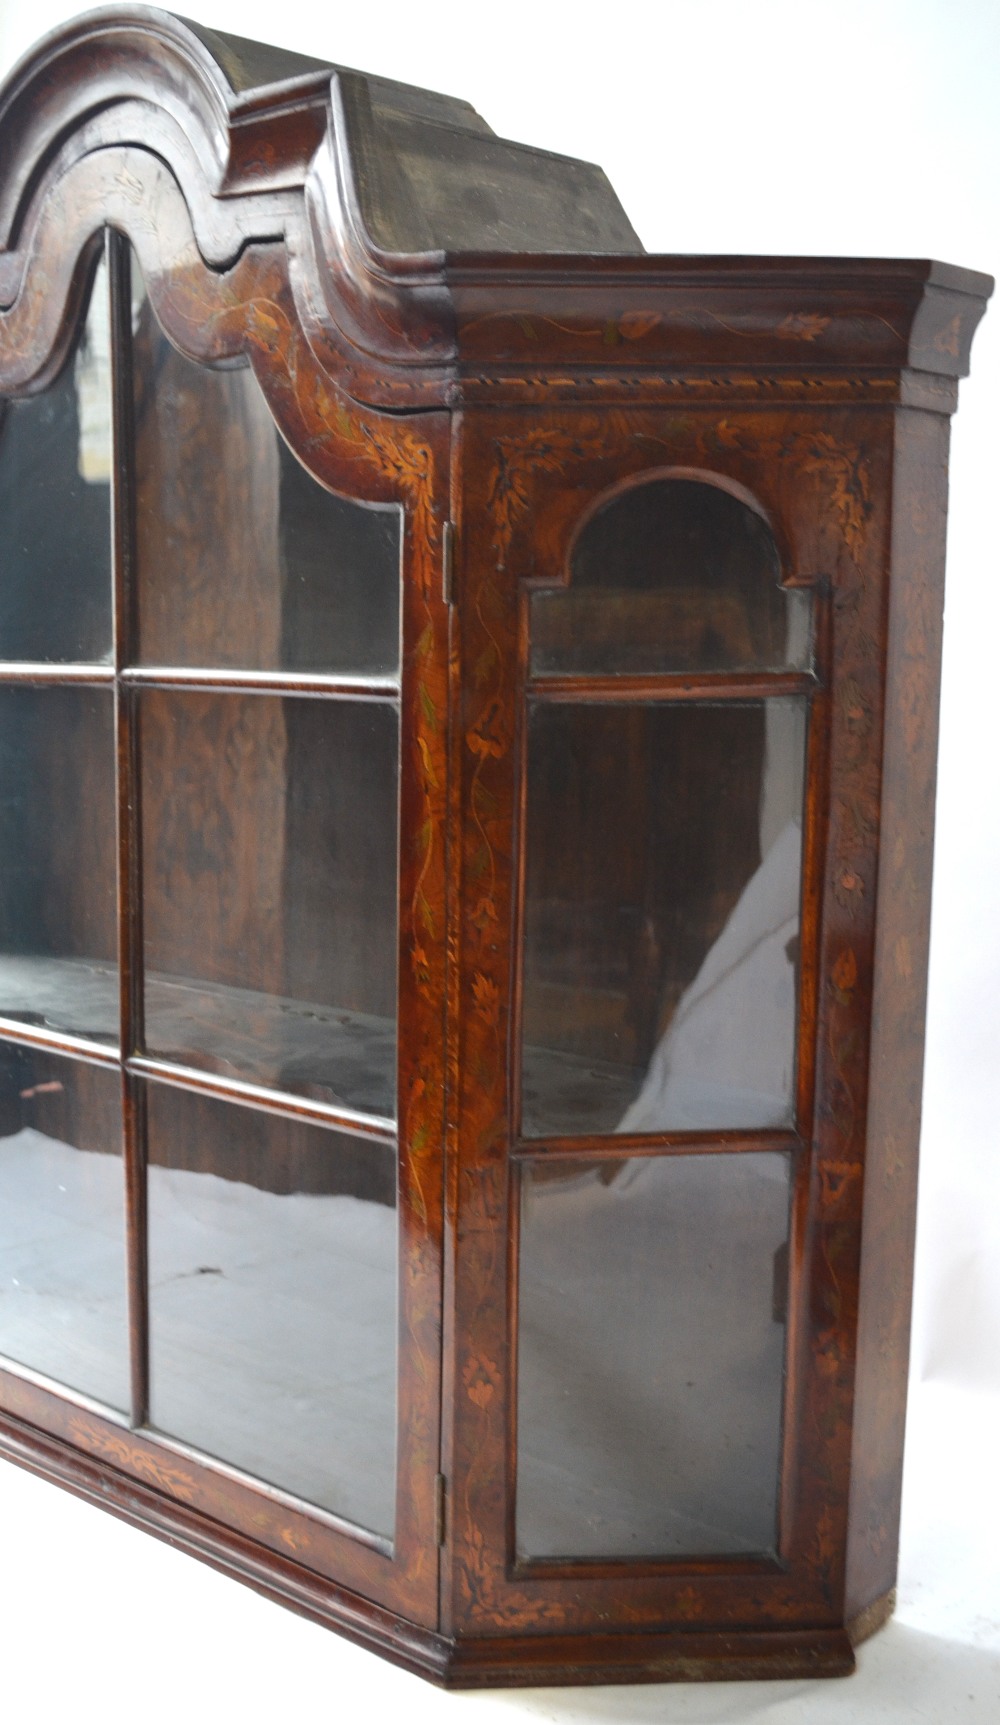 A 19th century Dutch floral marquetry walnut hanging display cabinet with moulded arched top over - Image 2 of 7